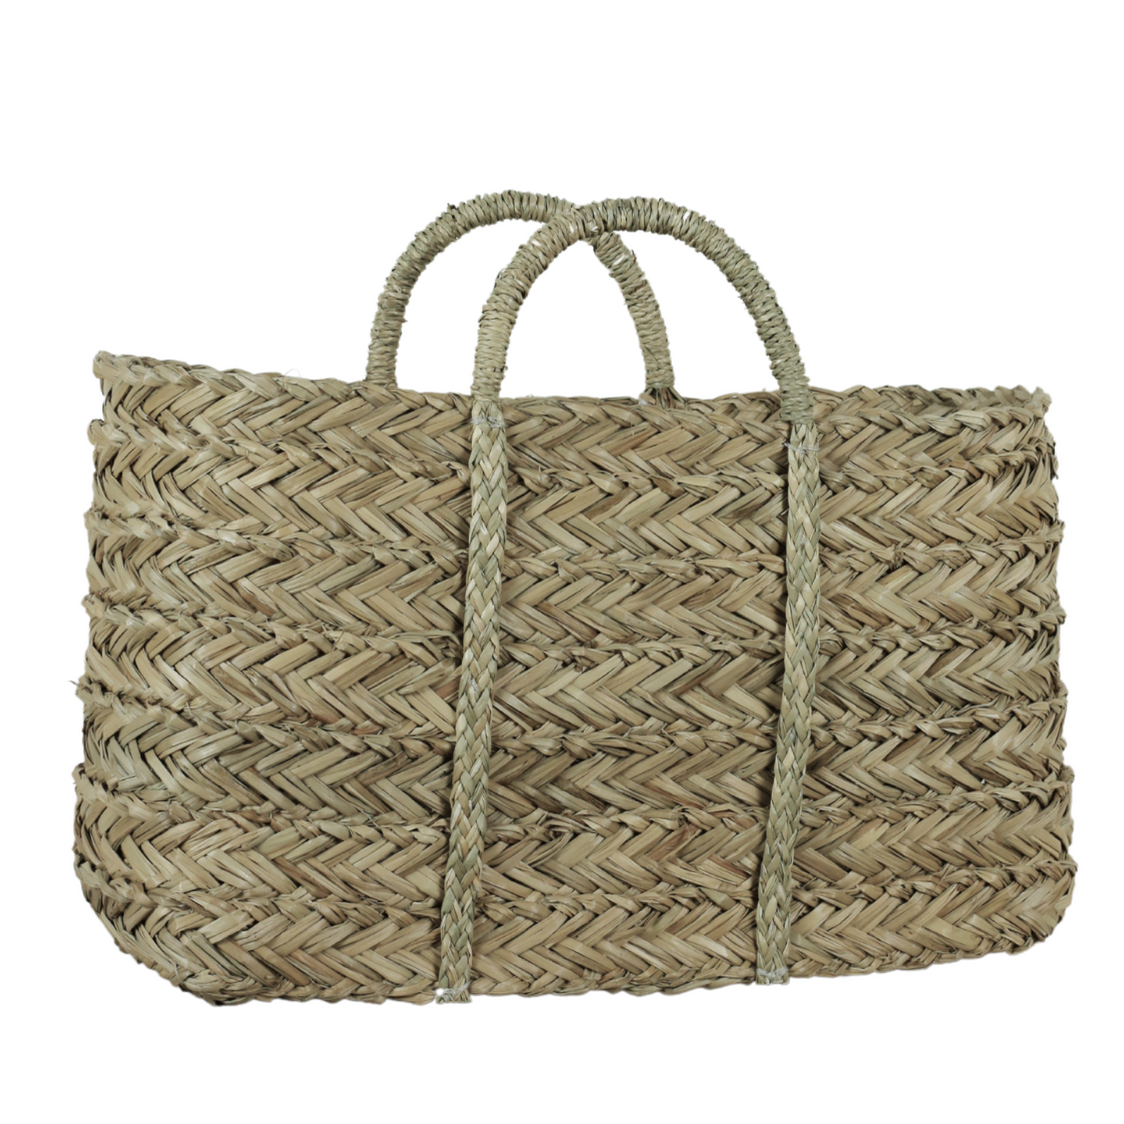 Small Plaited Seagrass Tote Bag